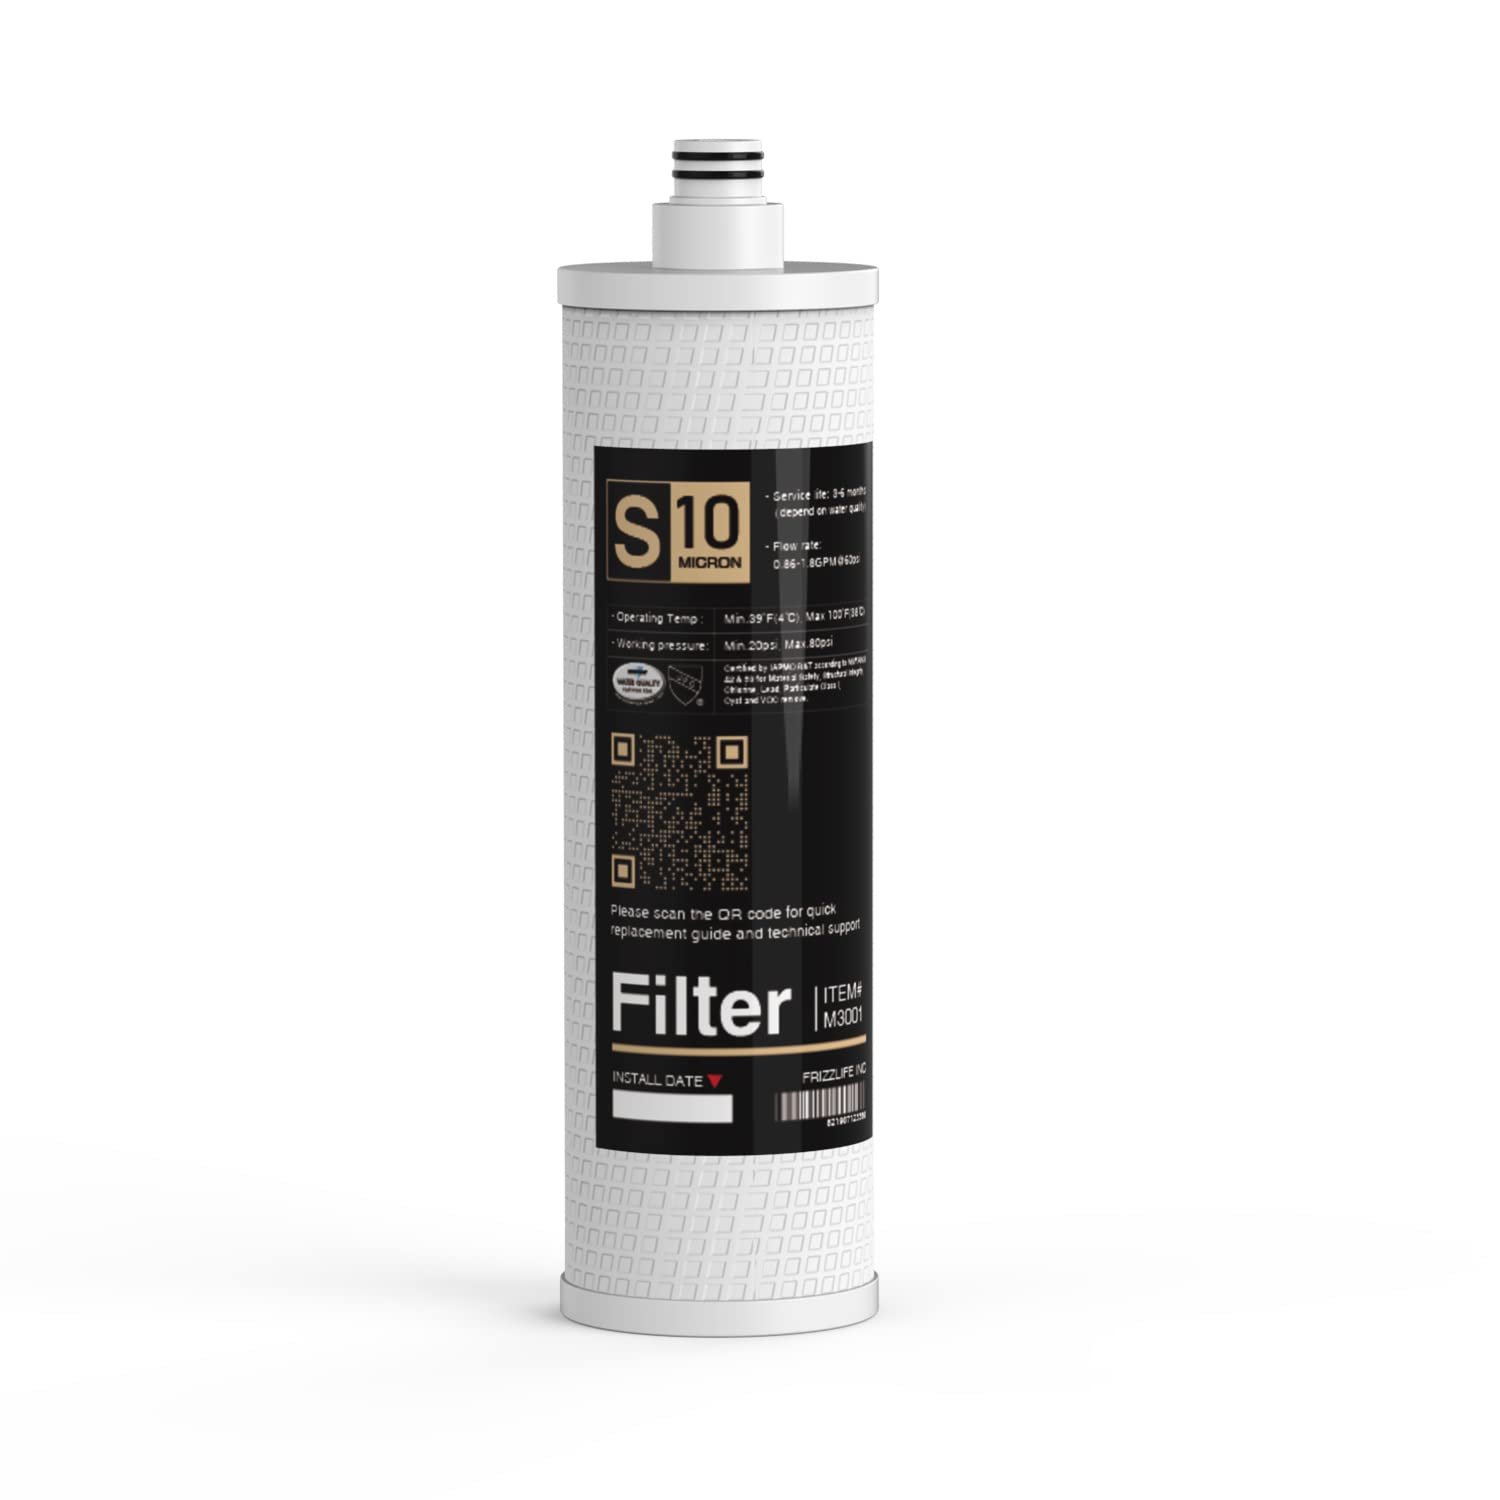 Frizzlife Updated M3001 Replacement Filter Cartridge (S) - Sediment Filter Cartridge - 1St Stage For Sk99, Sp99, Sk99 New, And S